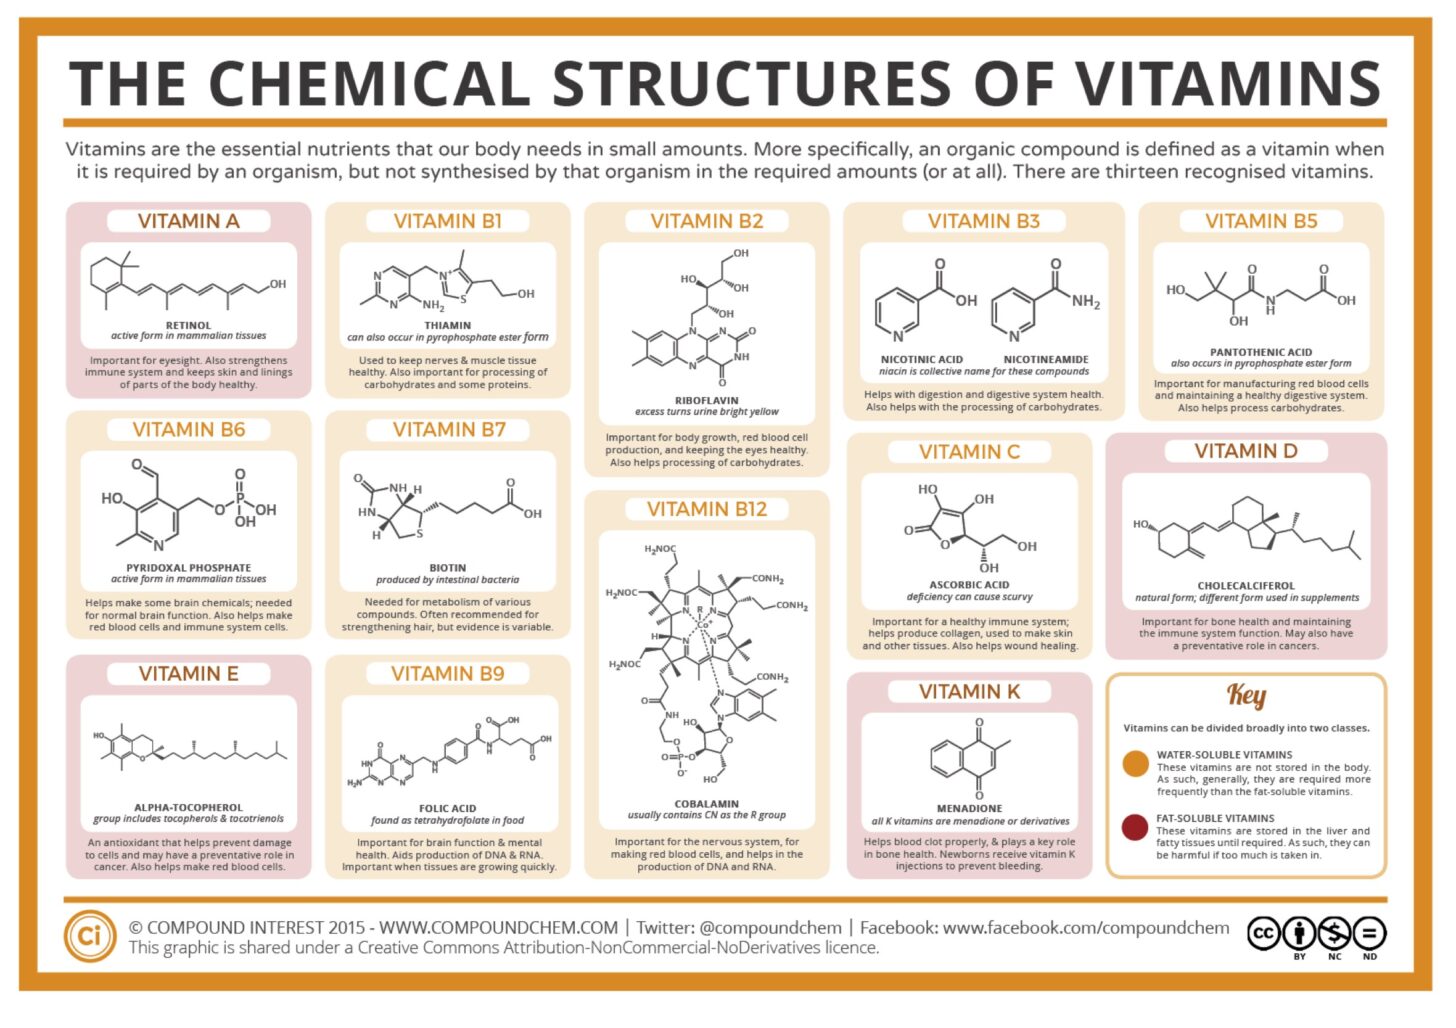 an illustration showing the chemical structures of common vitamins.